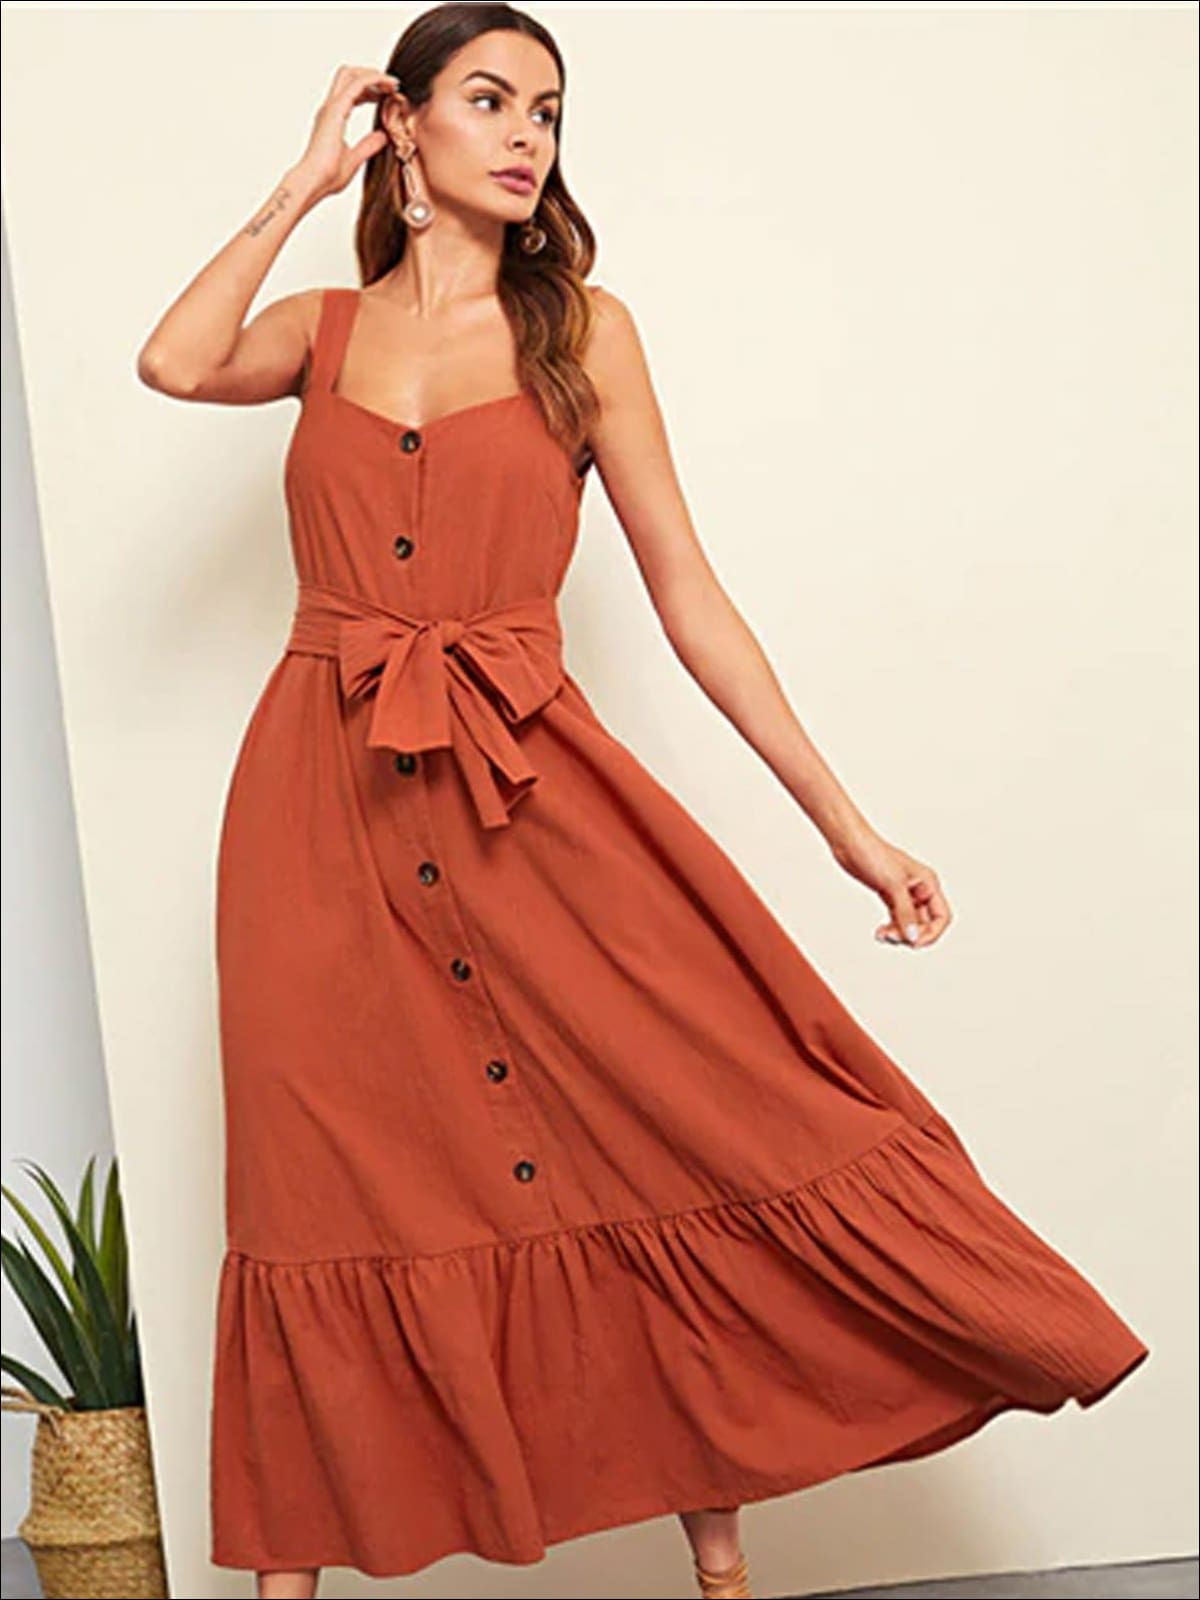 https://cdn.shopify.com/s/files/1/0996/1812/products/womens-ruffled-sleeveless-buttoned-casual-maxi-dress-40-59-99-afterchristmas-bfcutoff-brown-dropified-dresses-mia-belle-overseas-fulfillment-baby_360.jpg